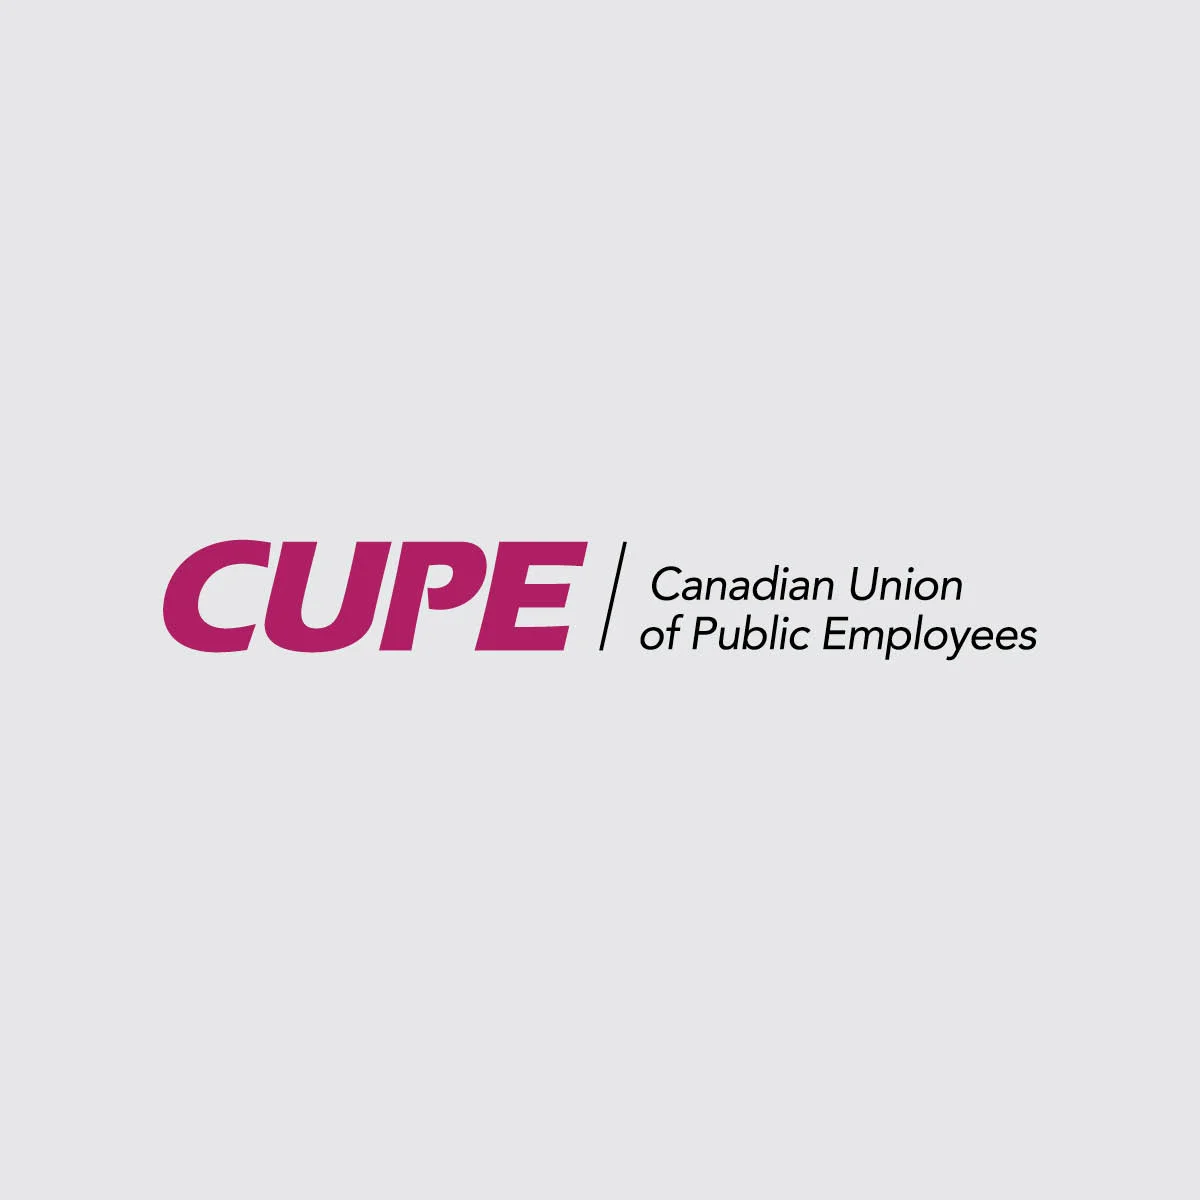 CUPE logo